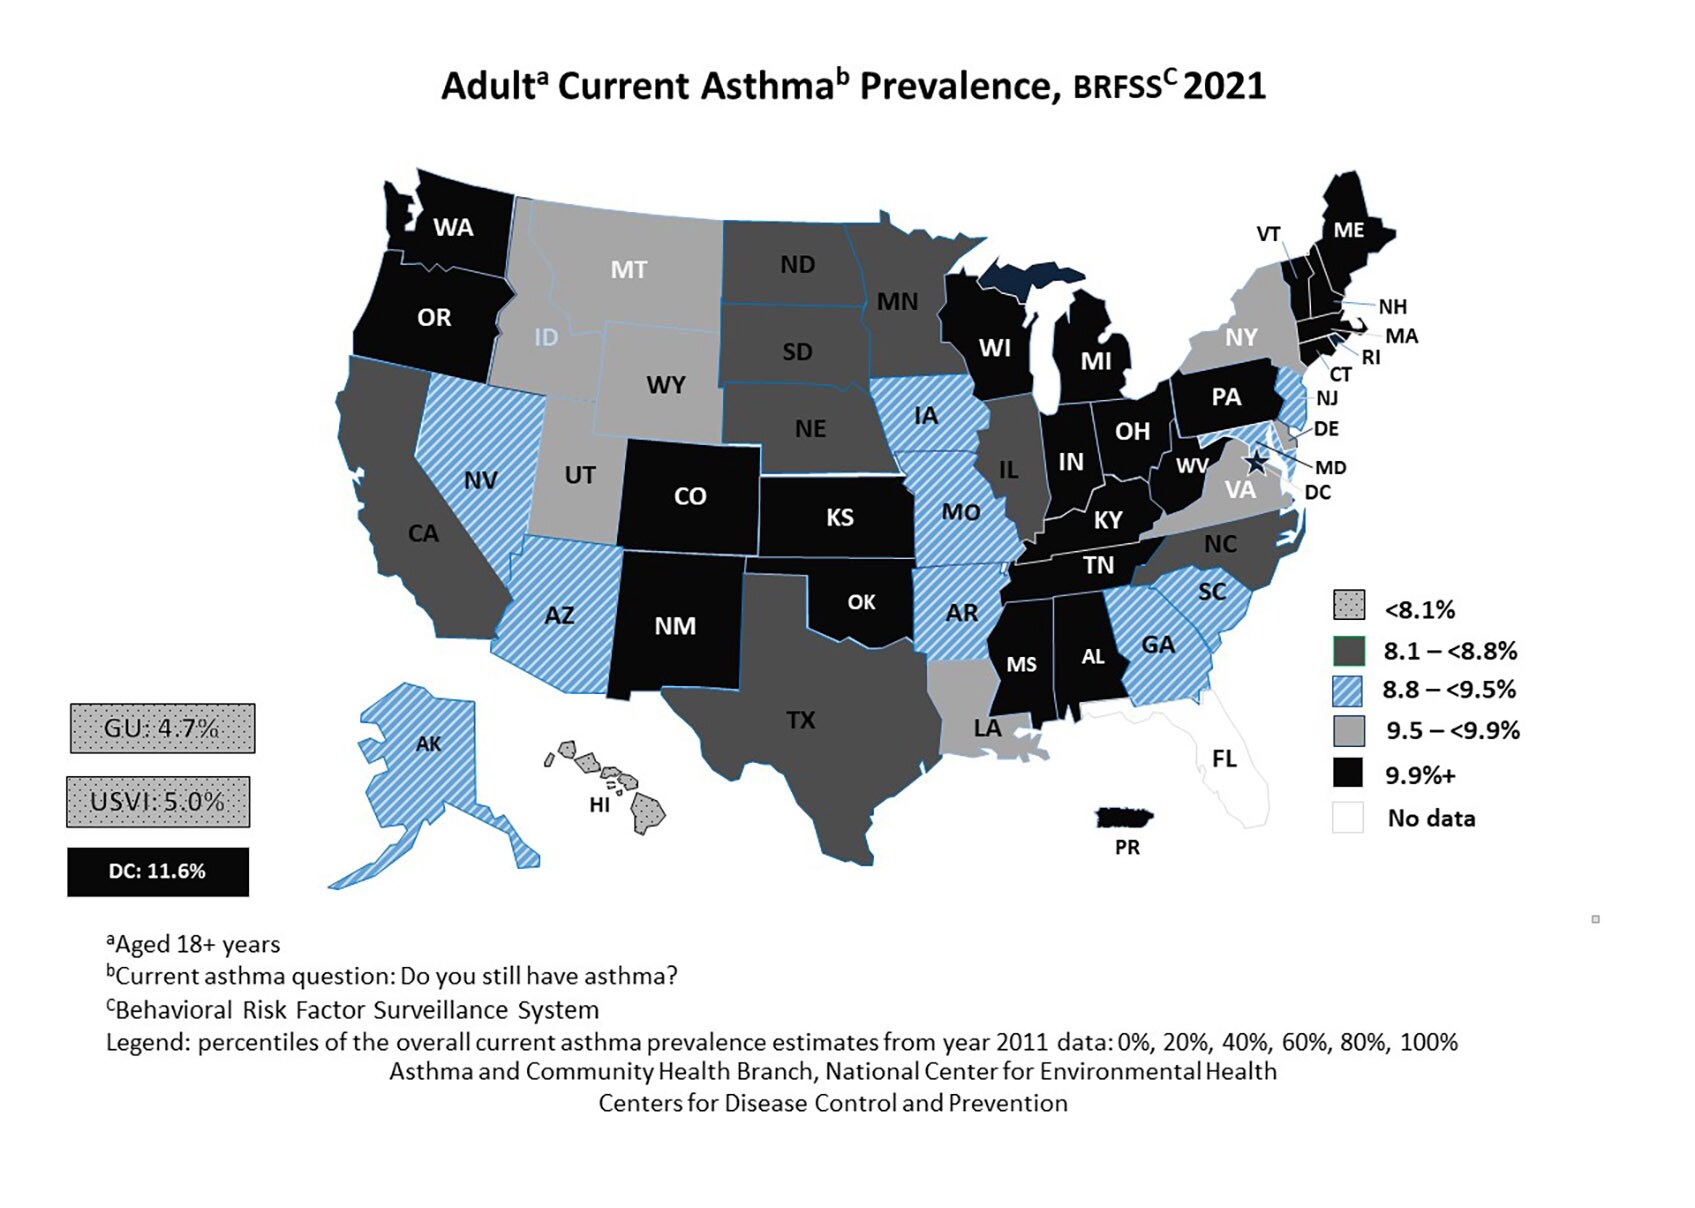 Black and white U.S. map showing adult self-reported current asthma prevalence by state for BRFSS 2020